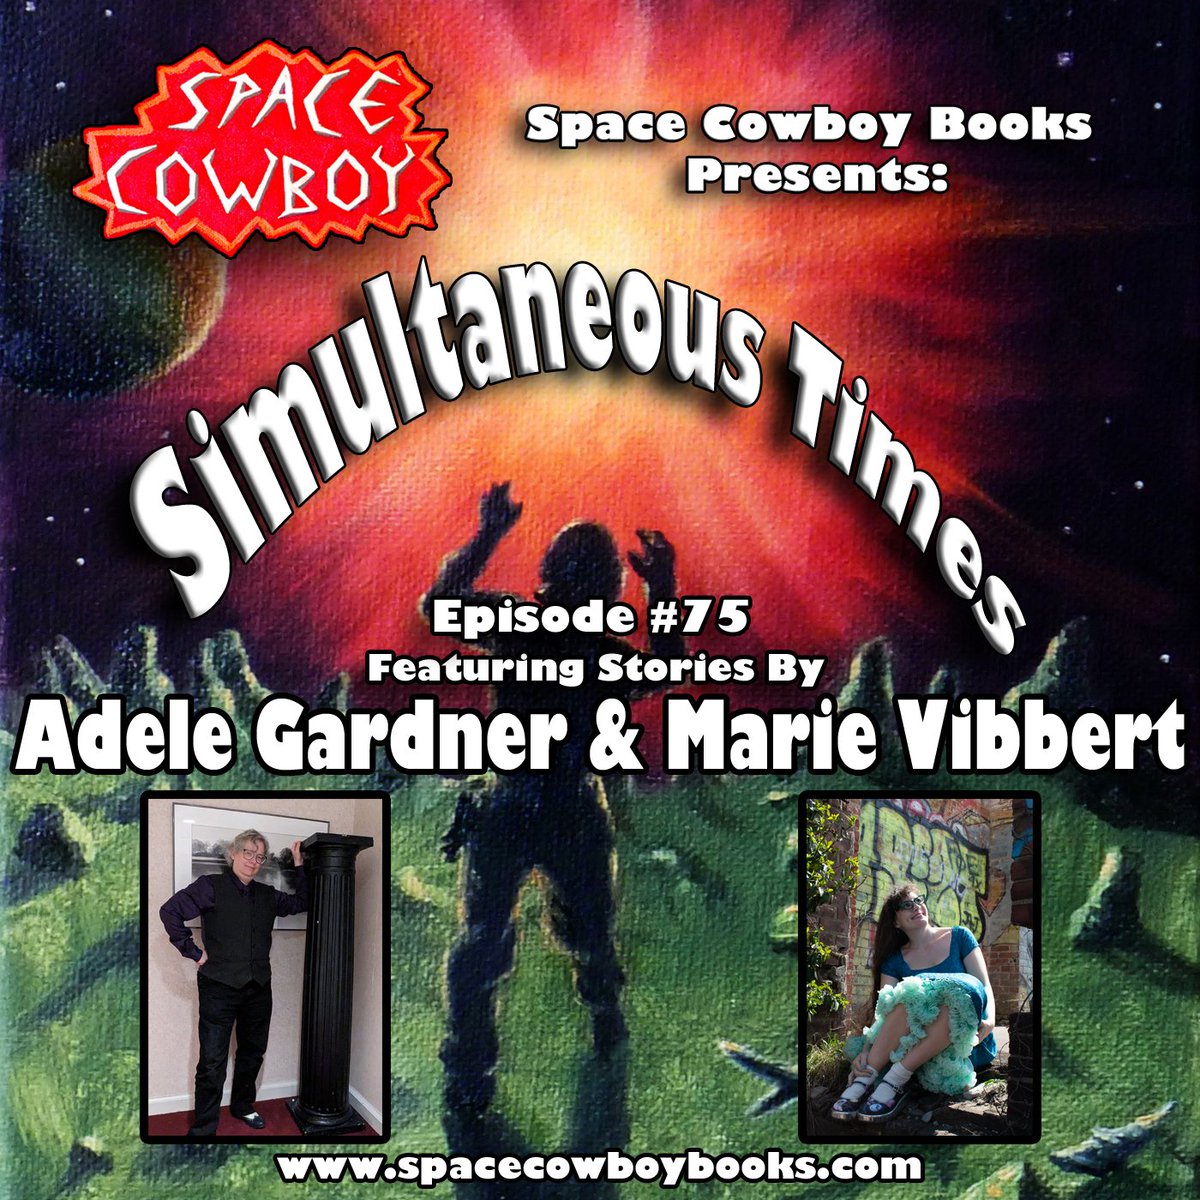 Simultaneous Times episode 75 is live! Featuring stories by Adele Gardner & Marie Vibbert, with music by TSG & Phog Masheeen. Available on your favorite podcast players or at podomatic.com/podcasts/space…